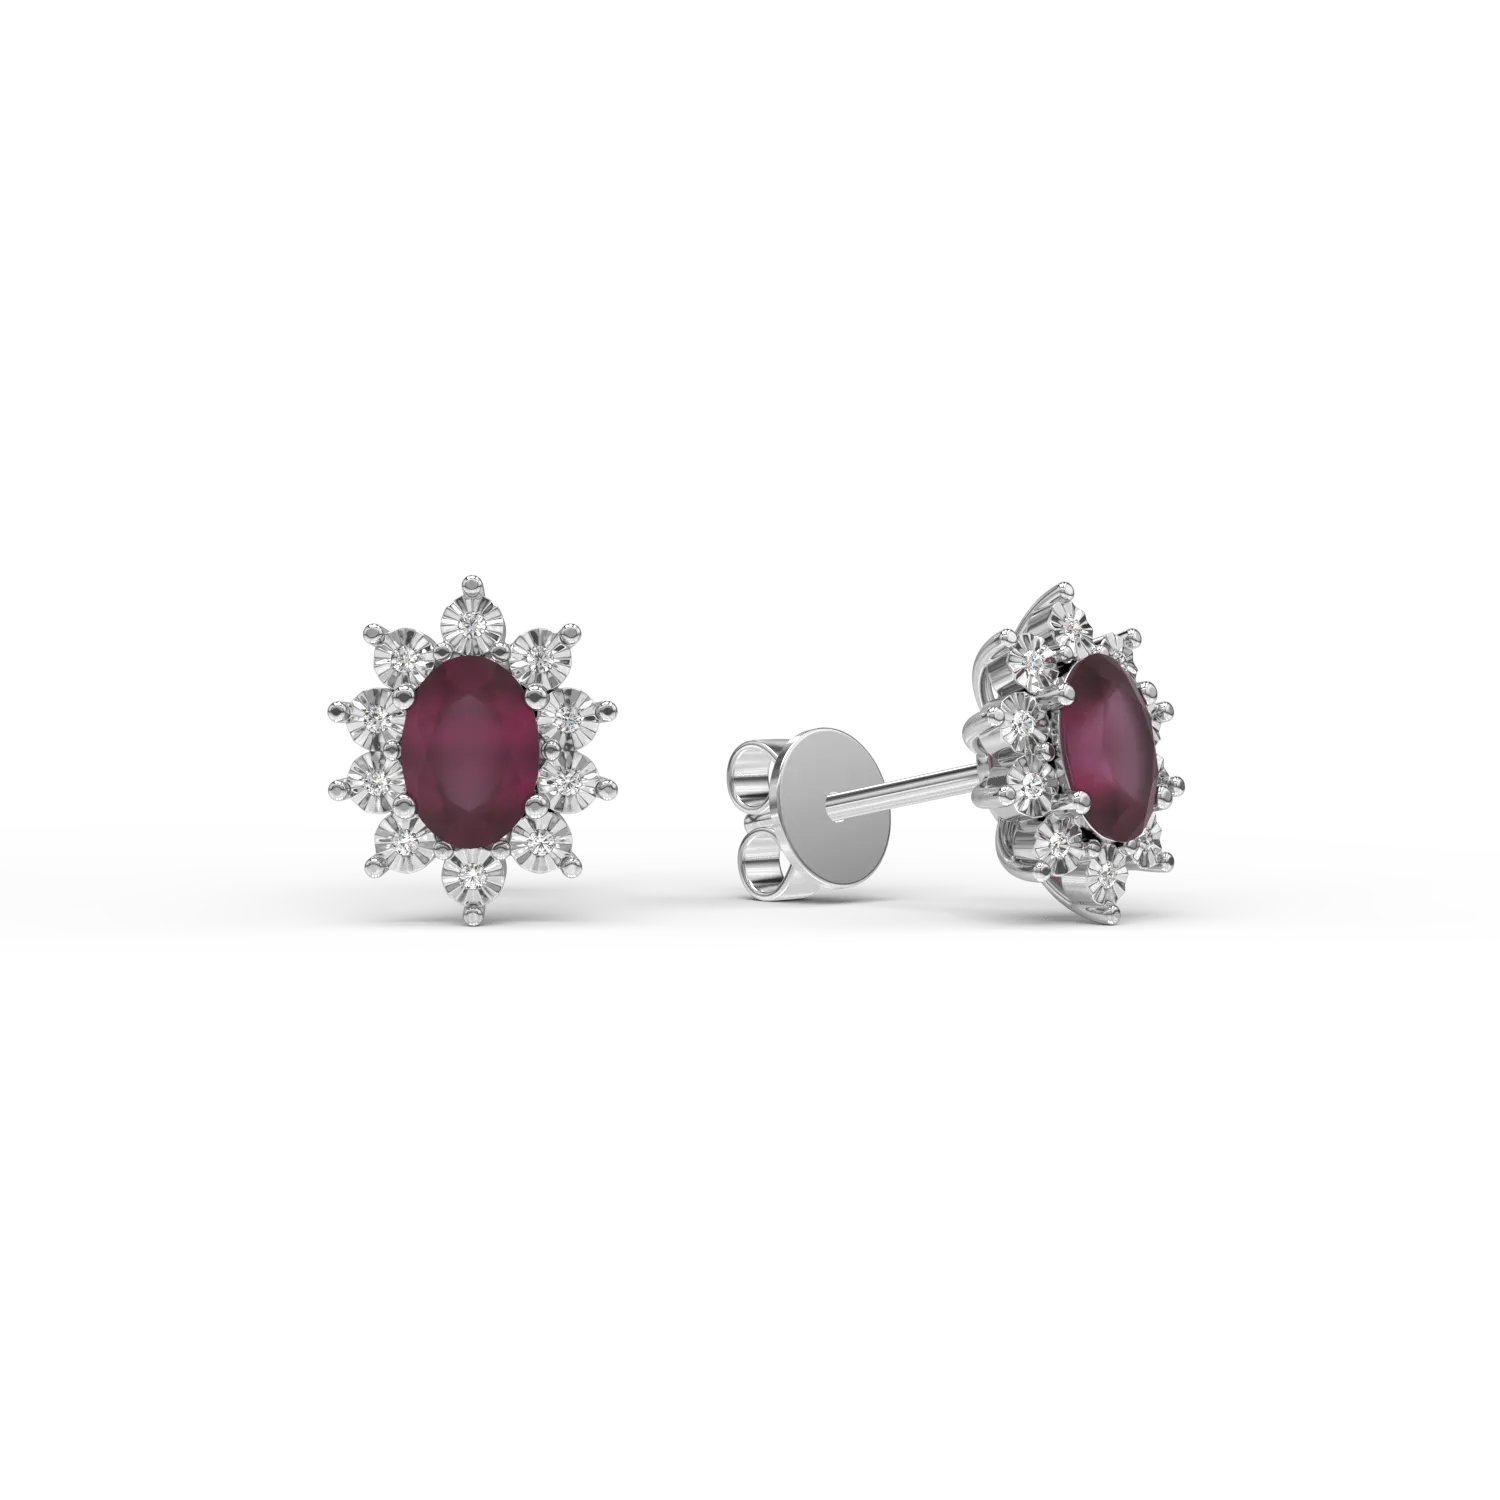 14K white gold earrings with 1.96ct rubines and 0.05ct diamonds